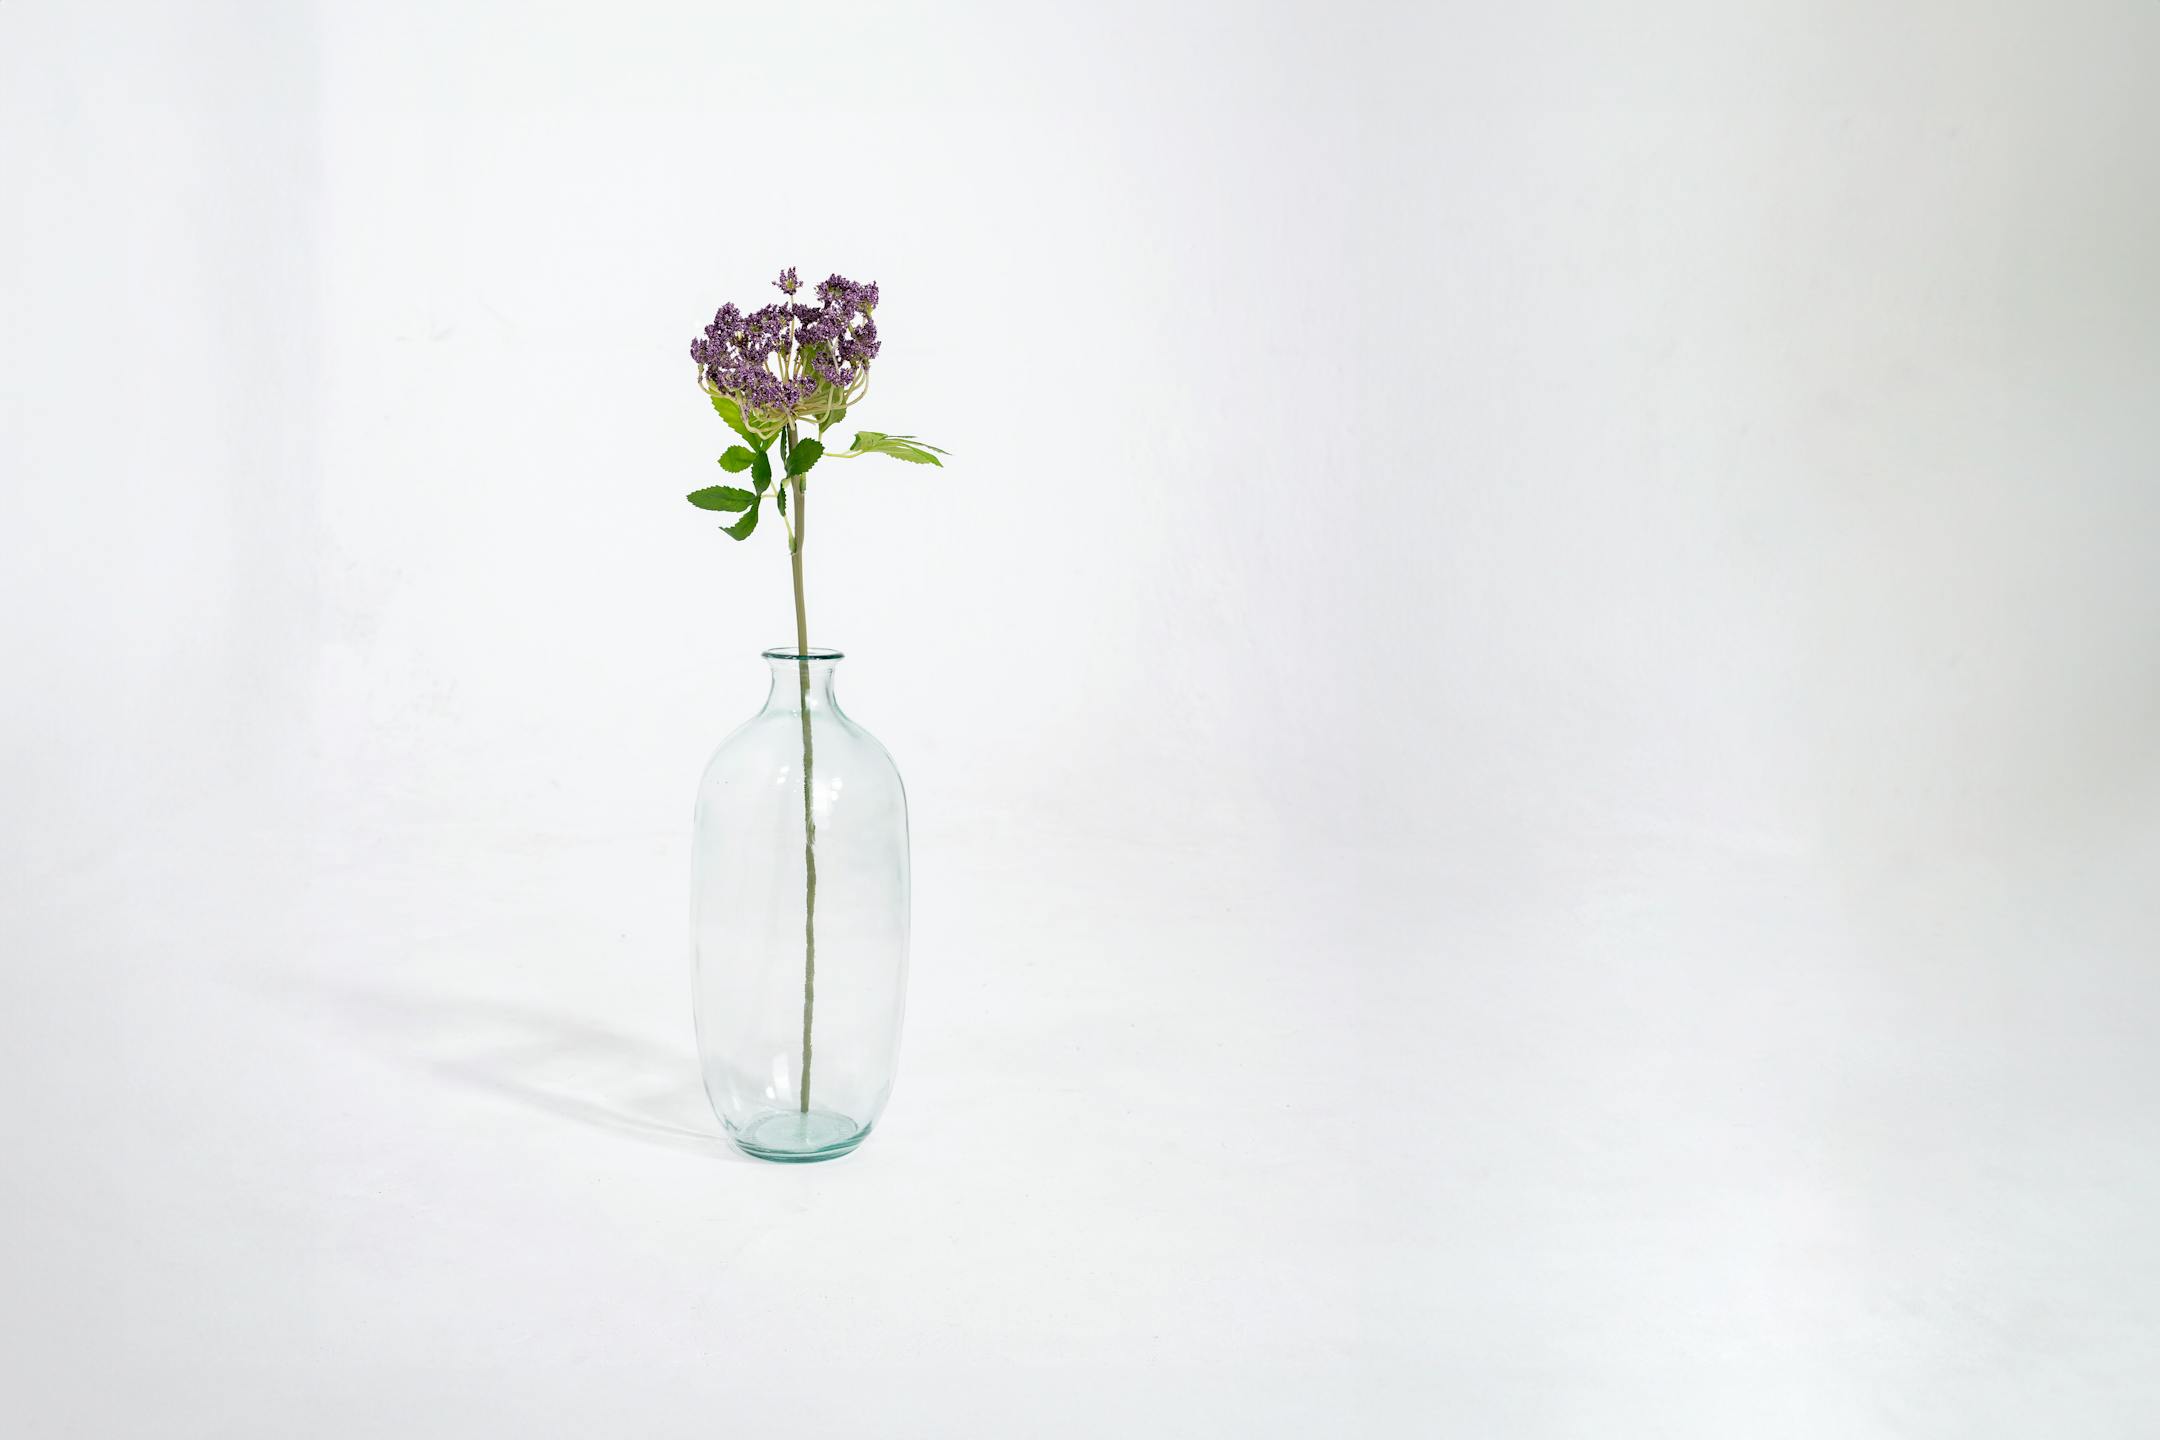 Purple artificial cow parsley stem in glass vase